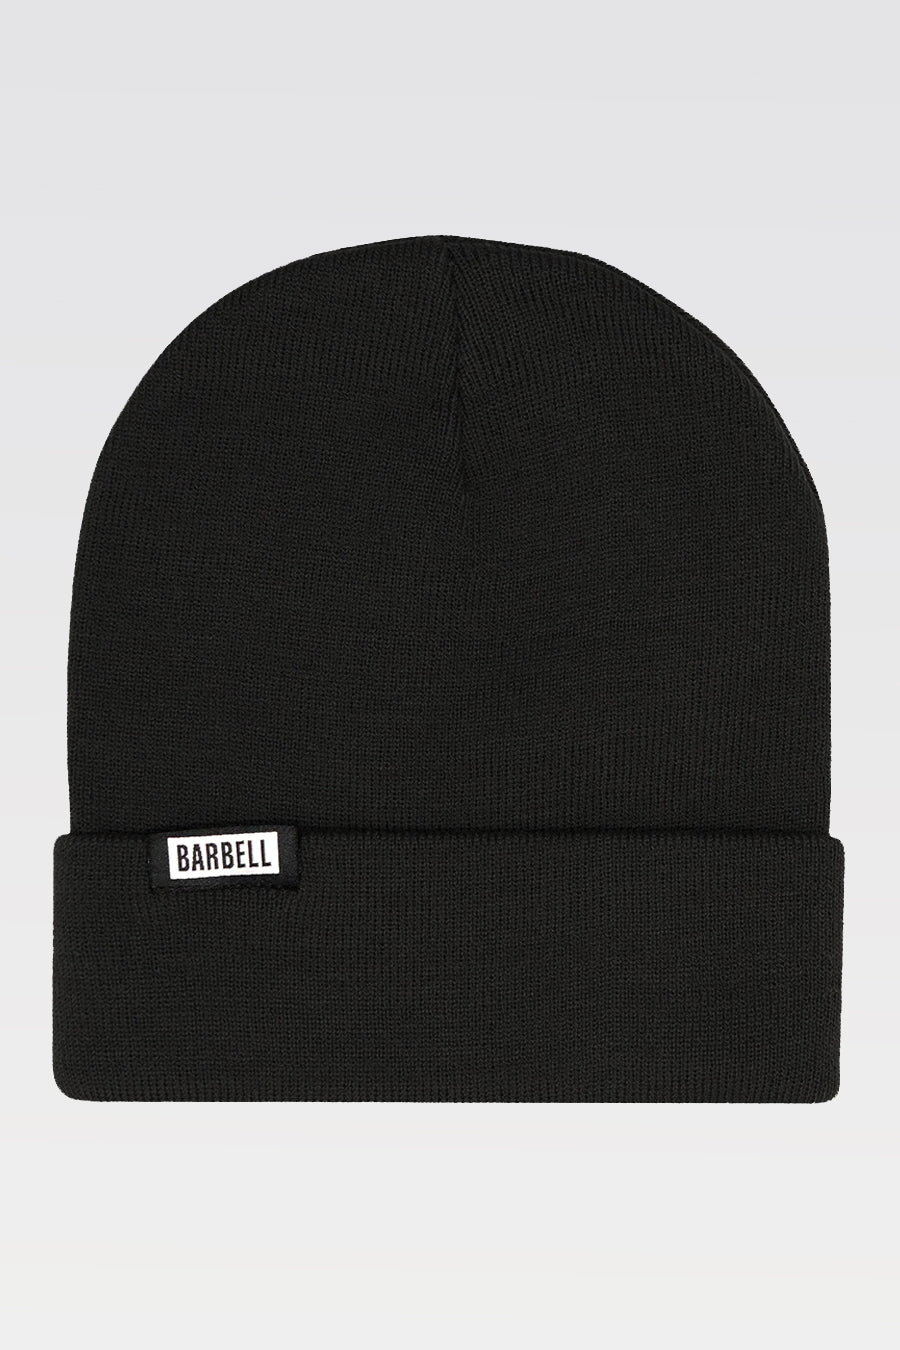 Barbell Beanie - Black - photo from front #color_black